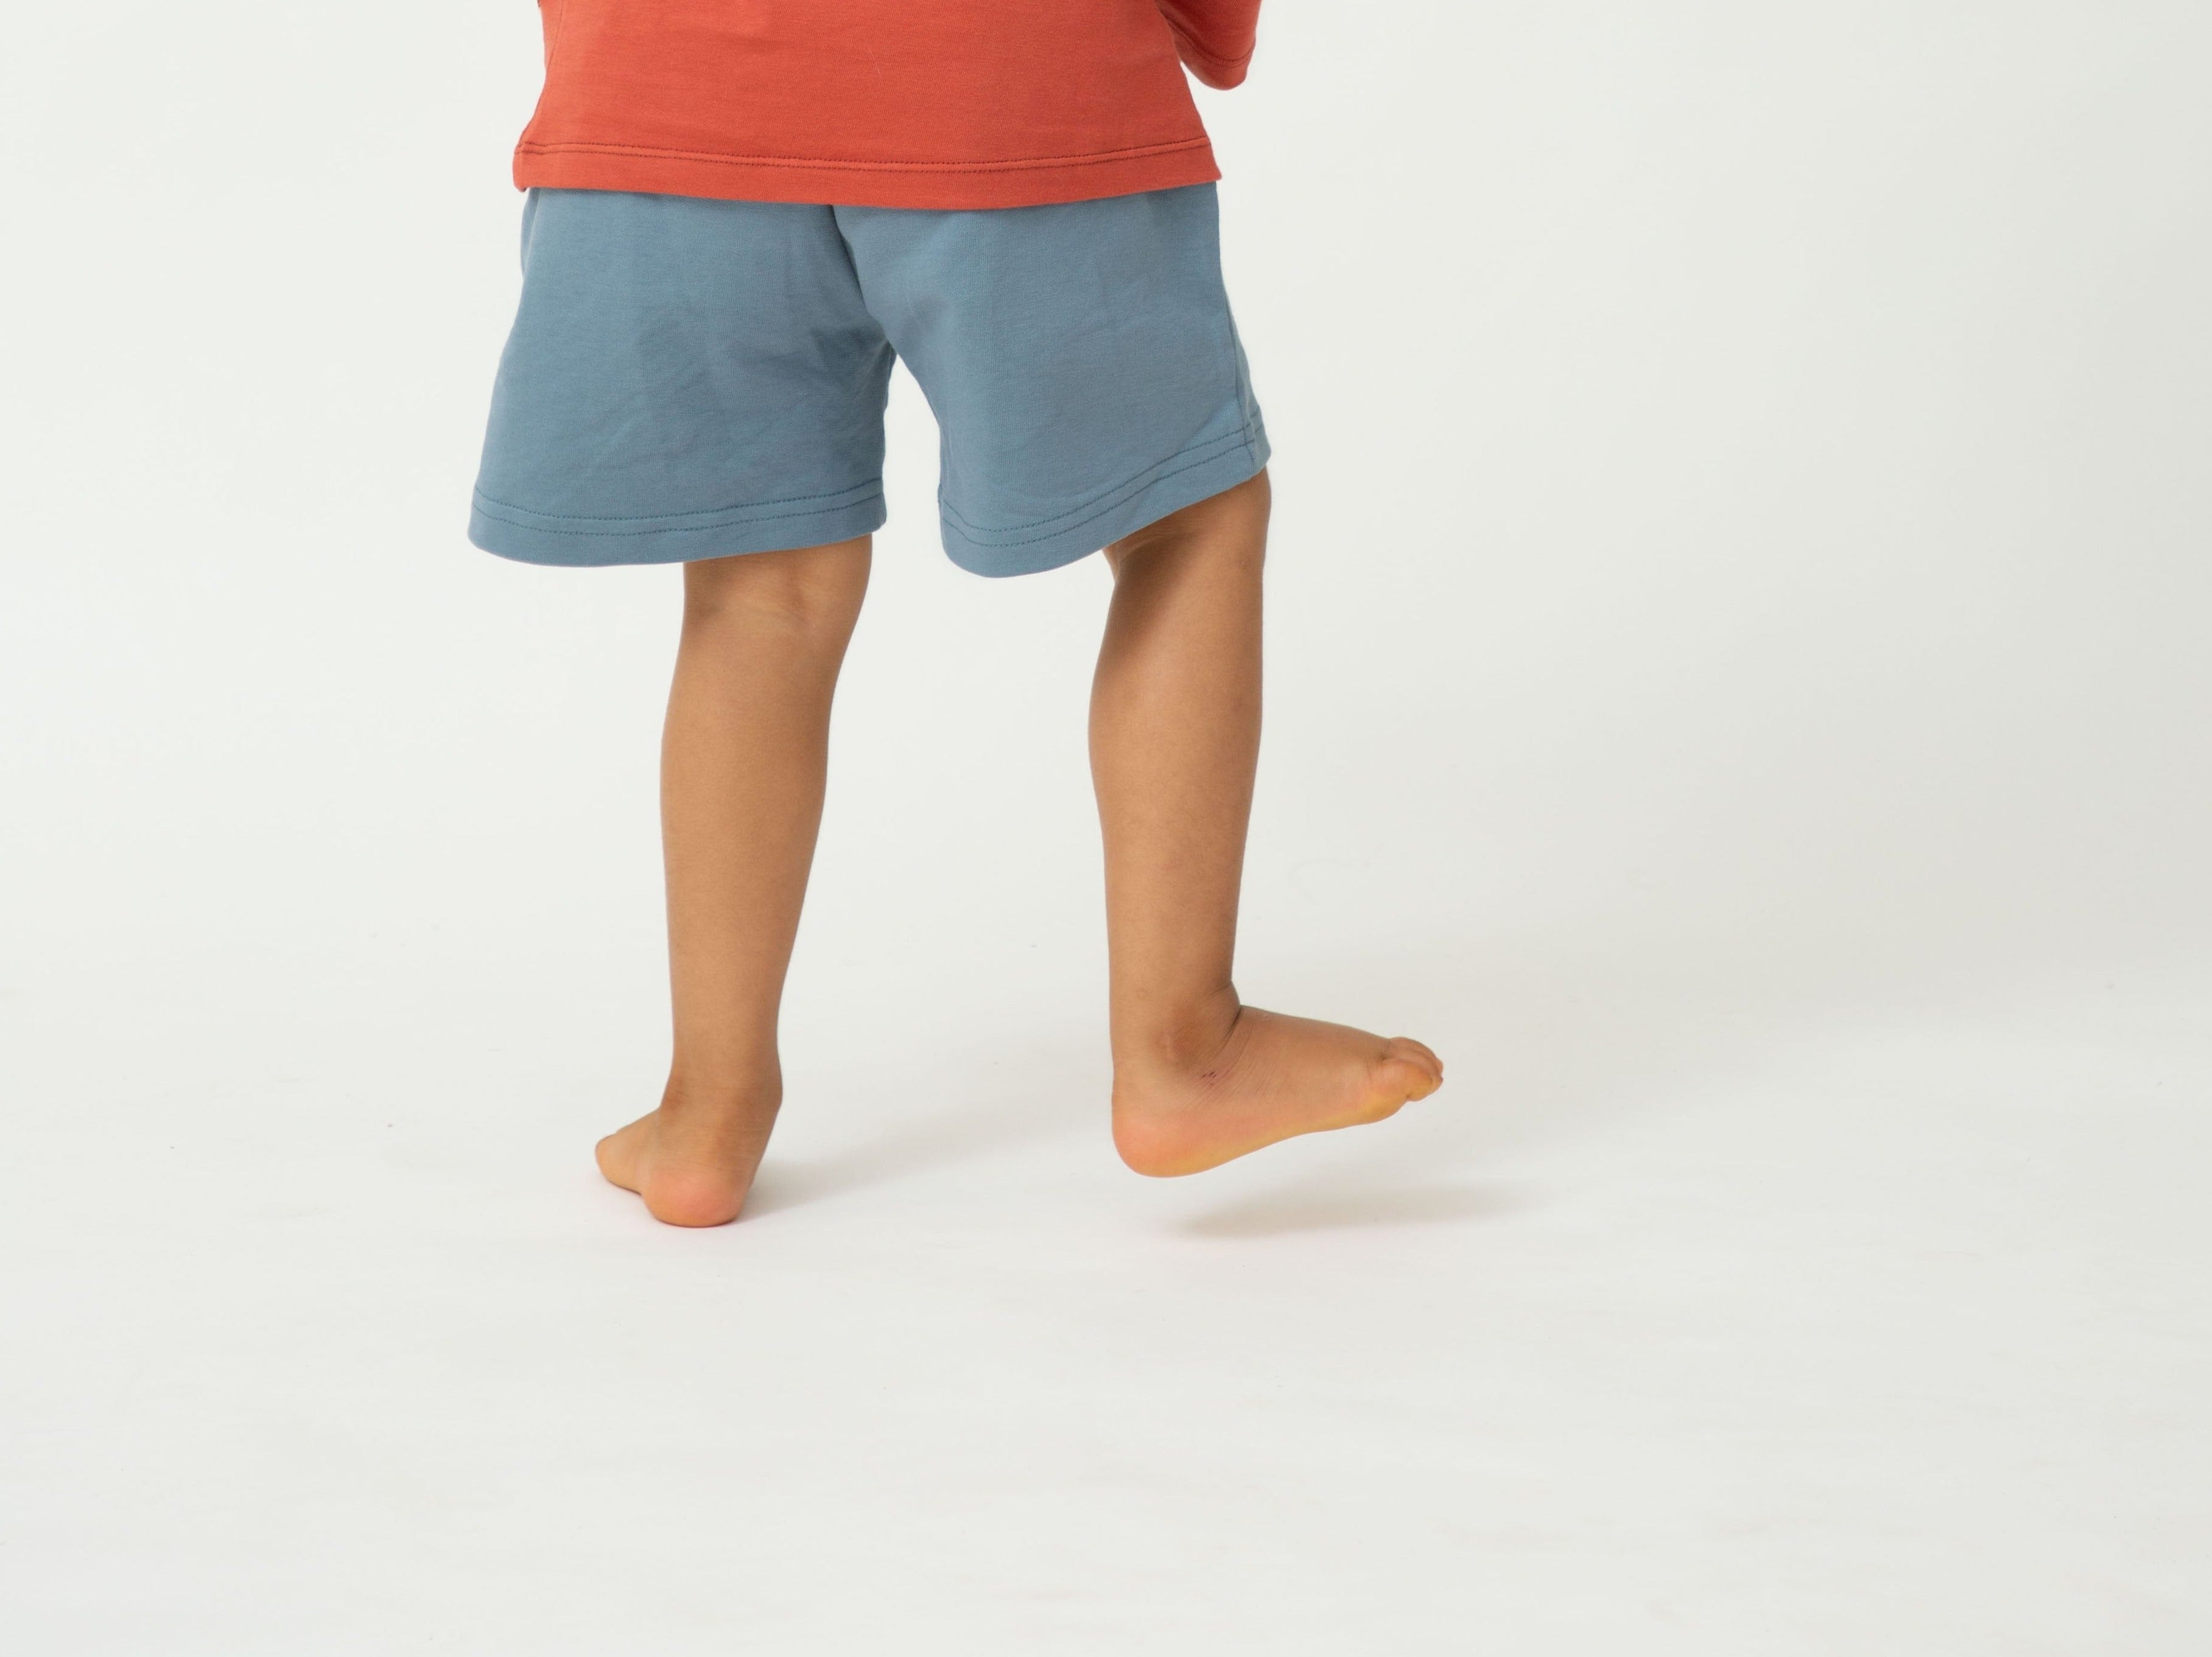 Saltpetre organic, casual unisex kids wear for boy and girls. Shorts with side pockets in blue colour.